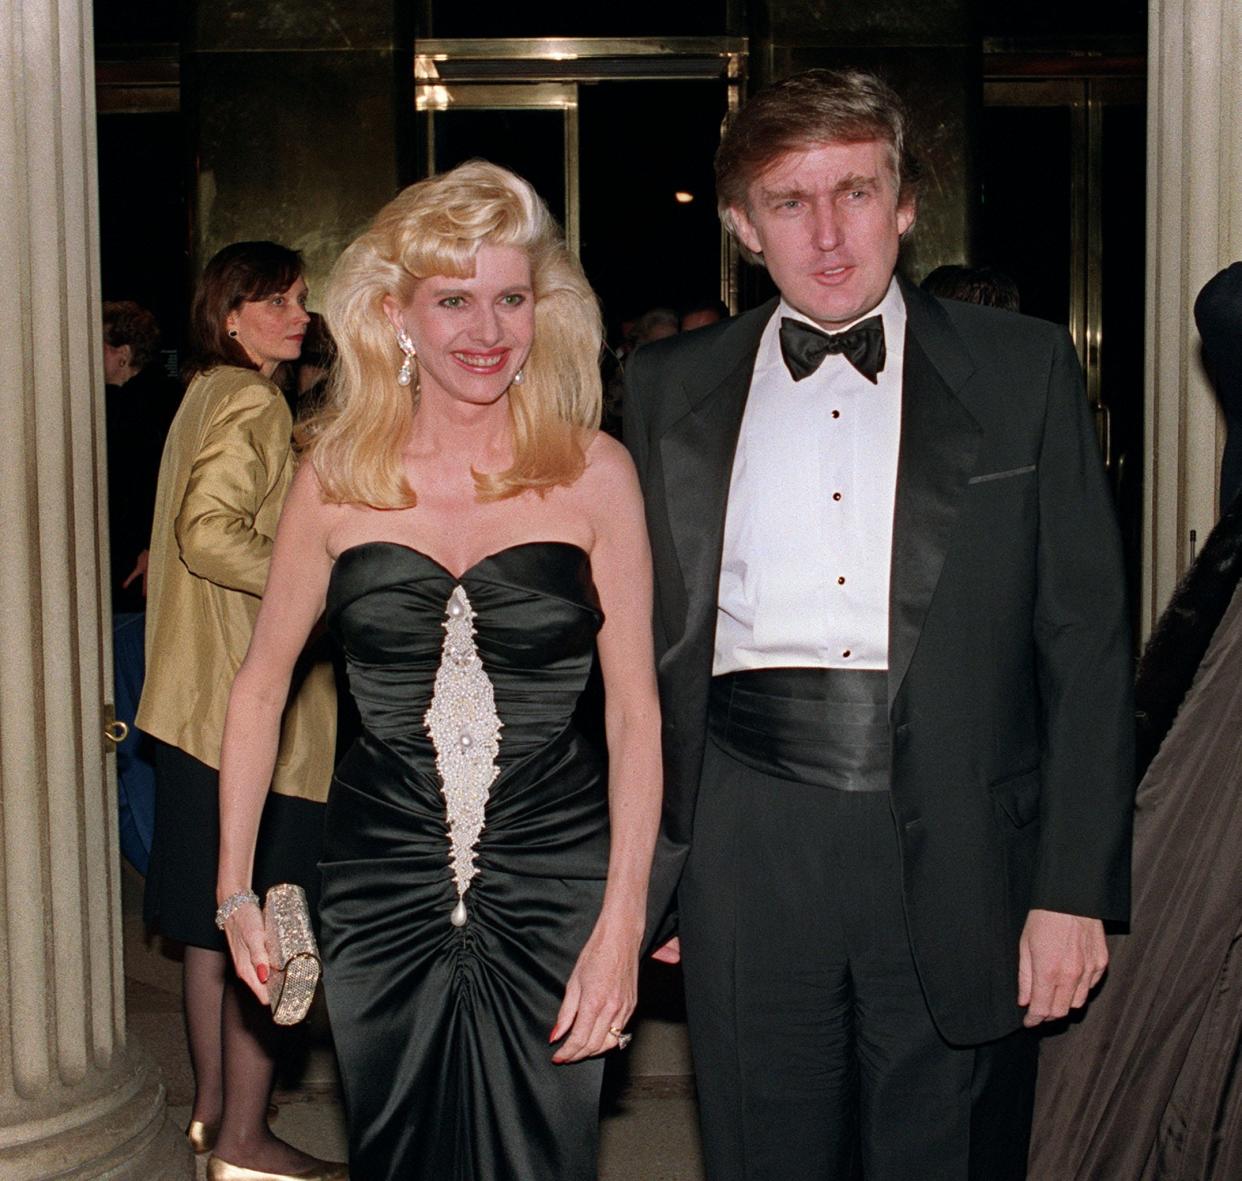 Donald Trump and Ivana Trump arrive on December 4, 1989 at a social engagement in New York.